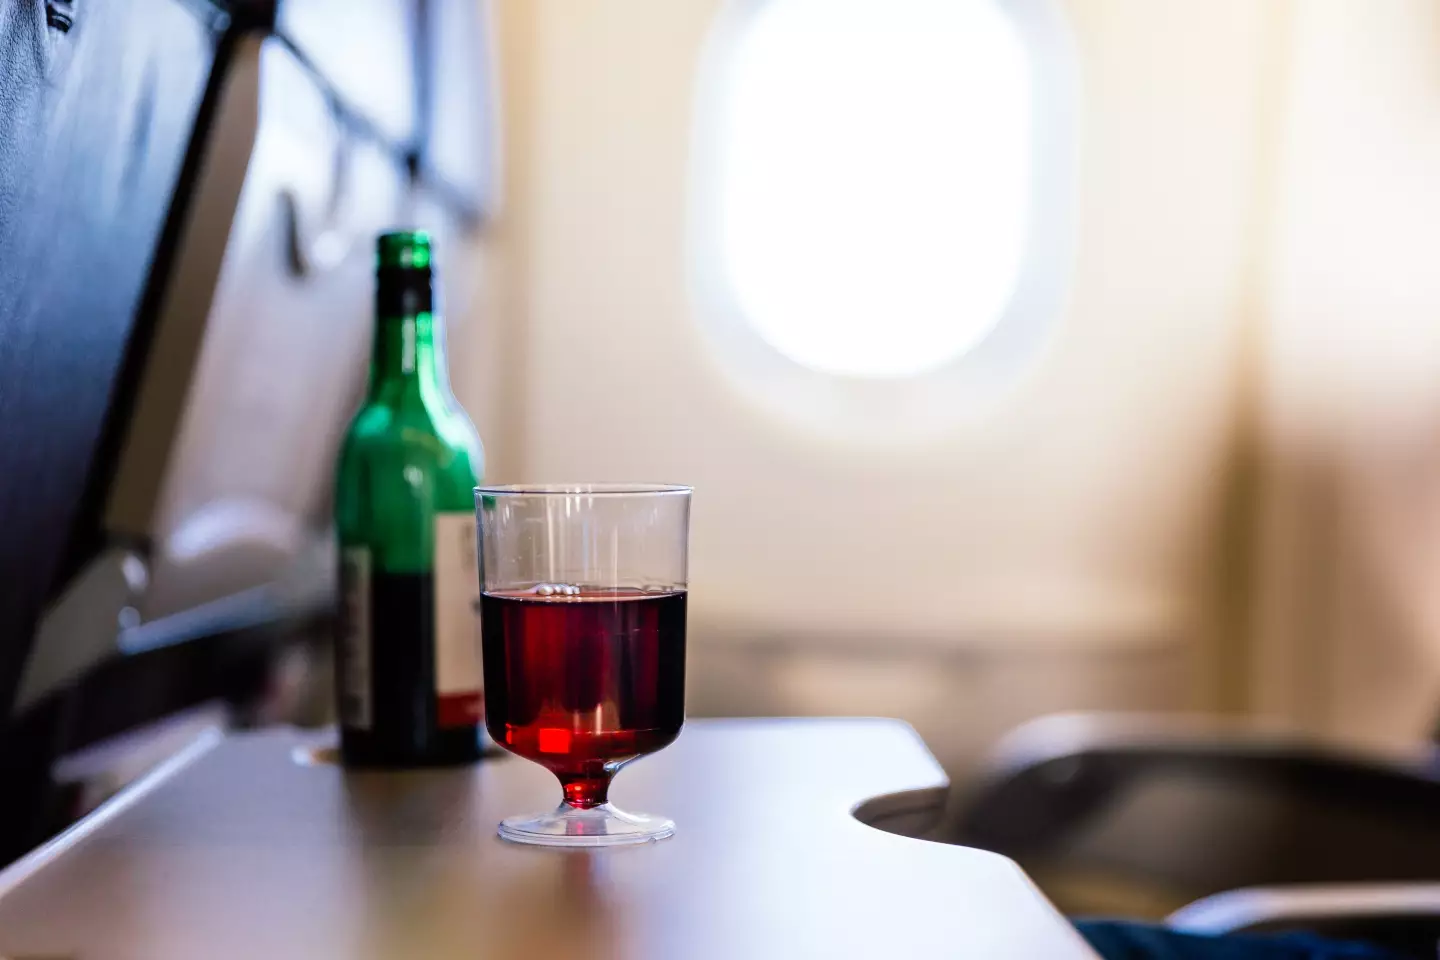 The passenger wanted to enjoy a glass of red on the flight.